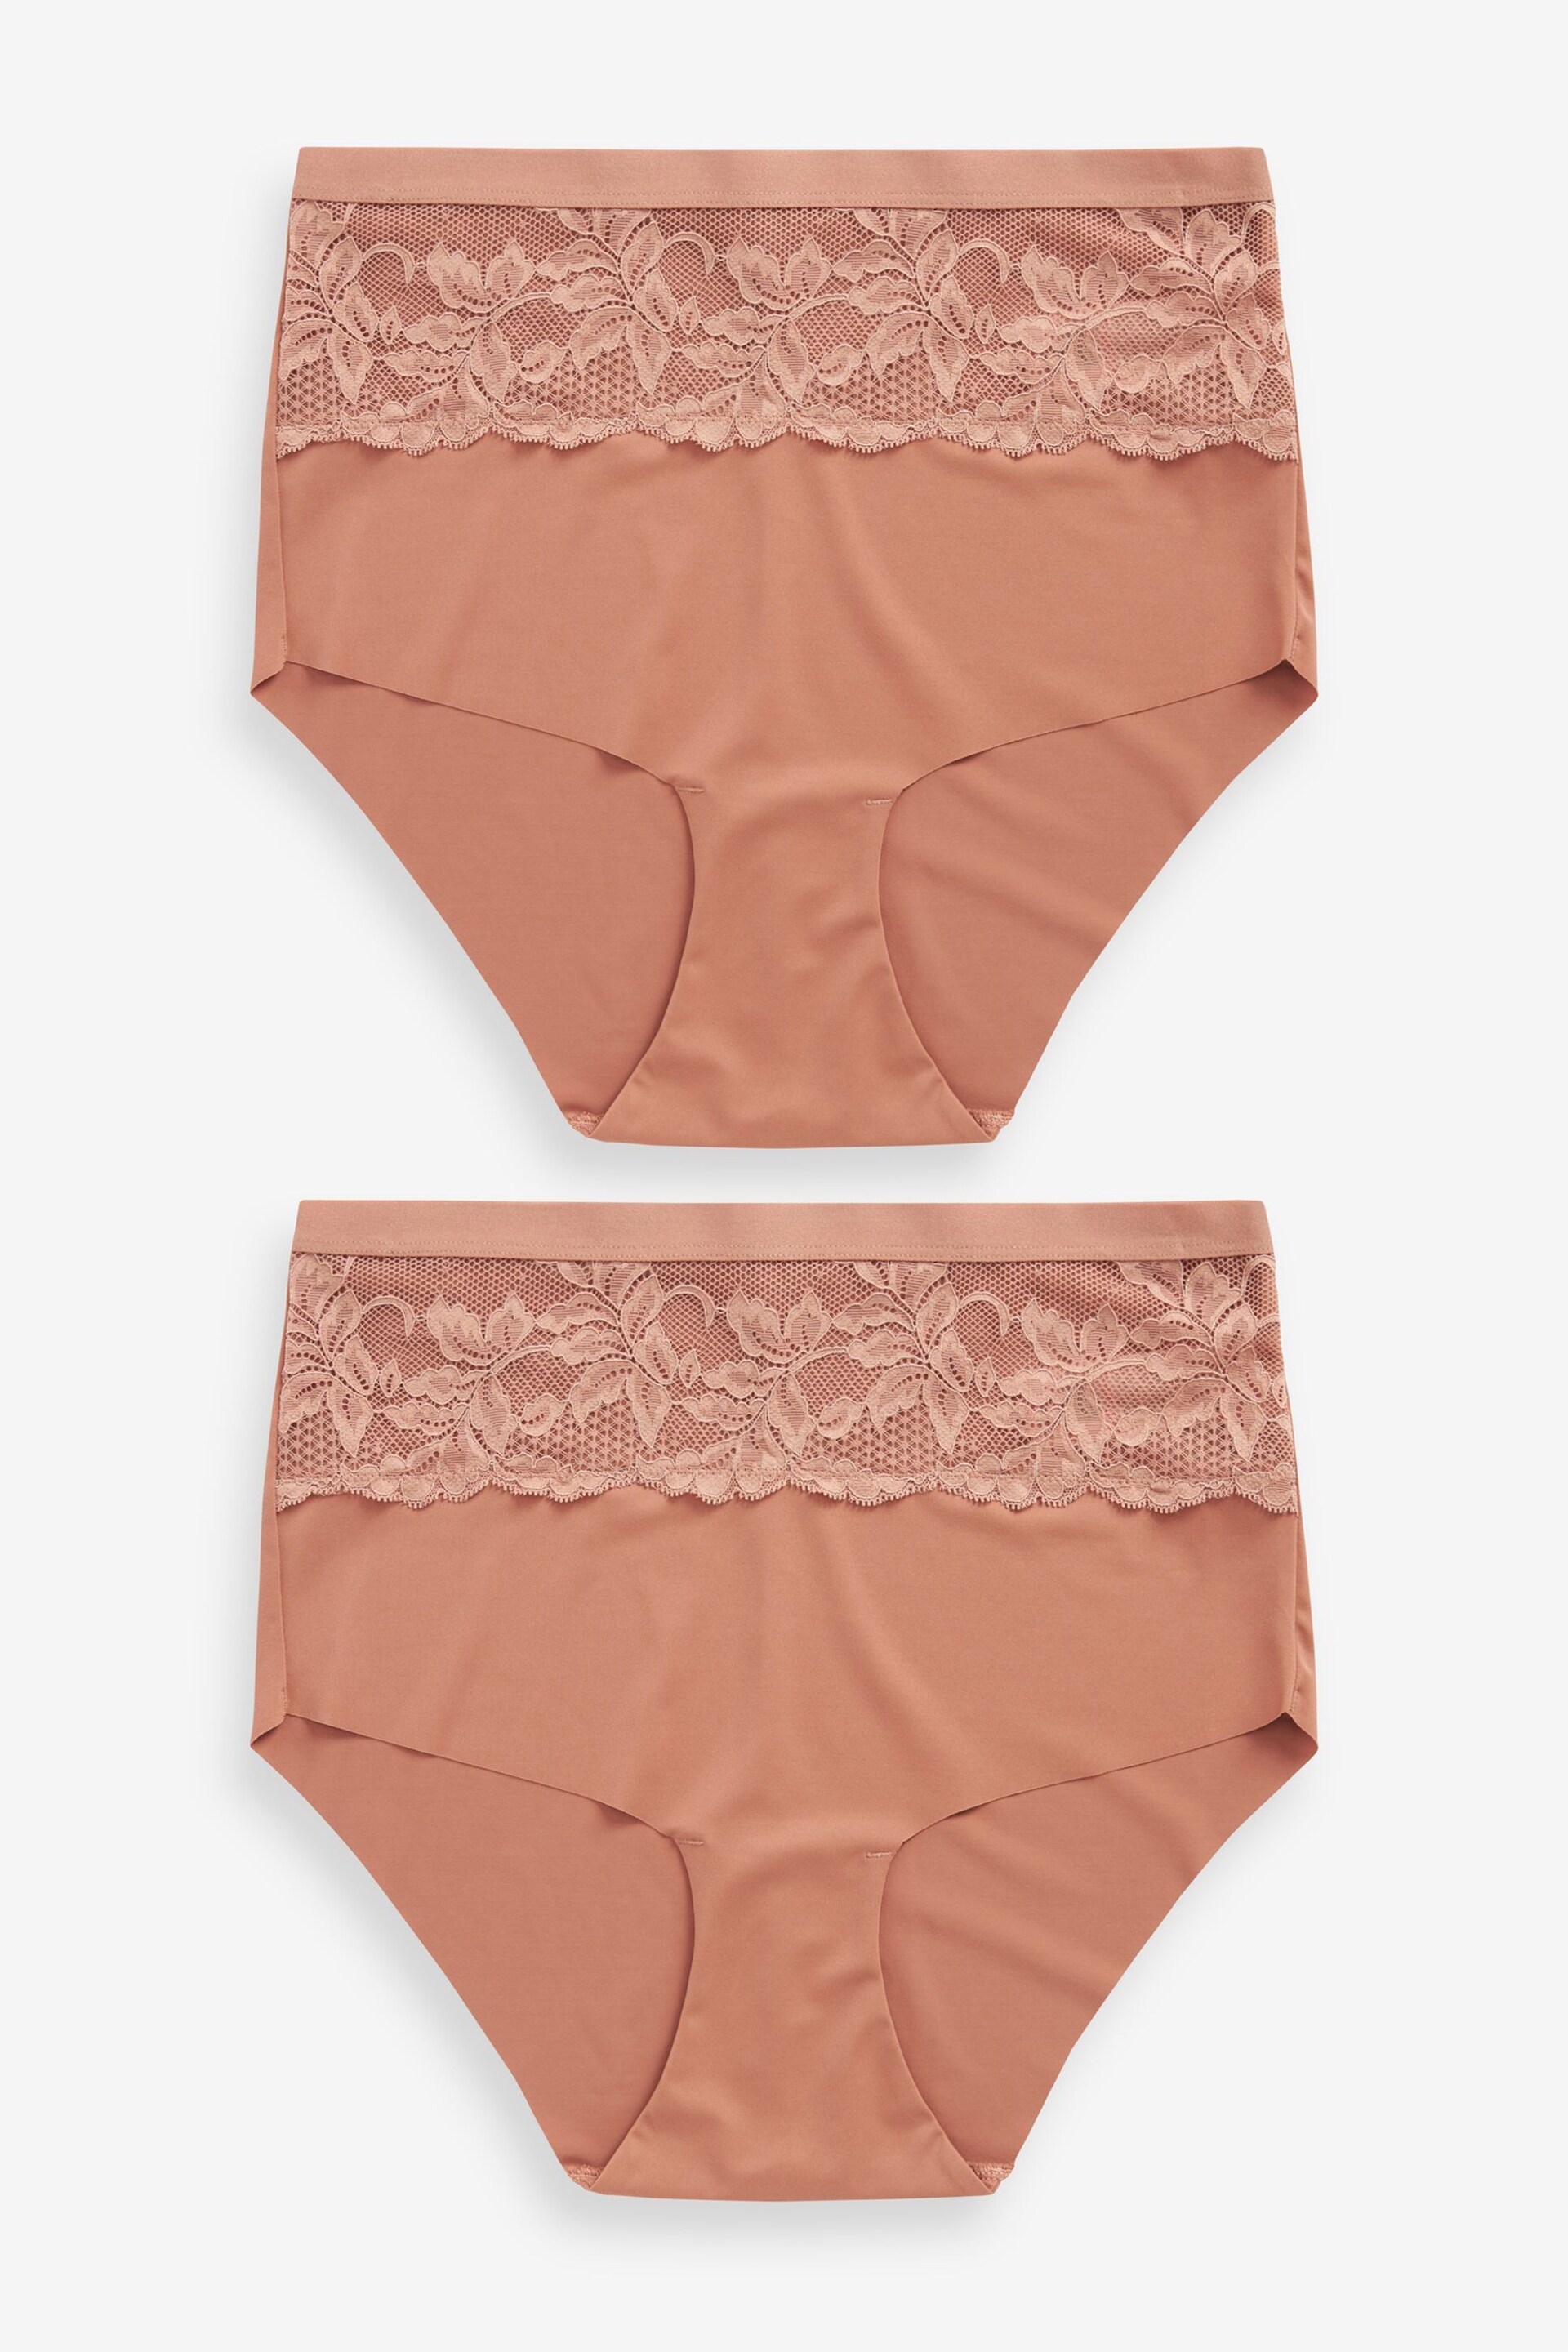 Neutral/Tan High Waist Lace Tummy Control Light Shaping Knickers 2 Pack - Image 1 of 3